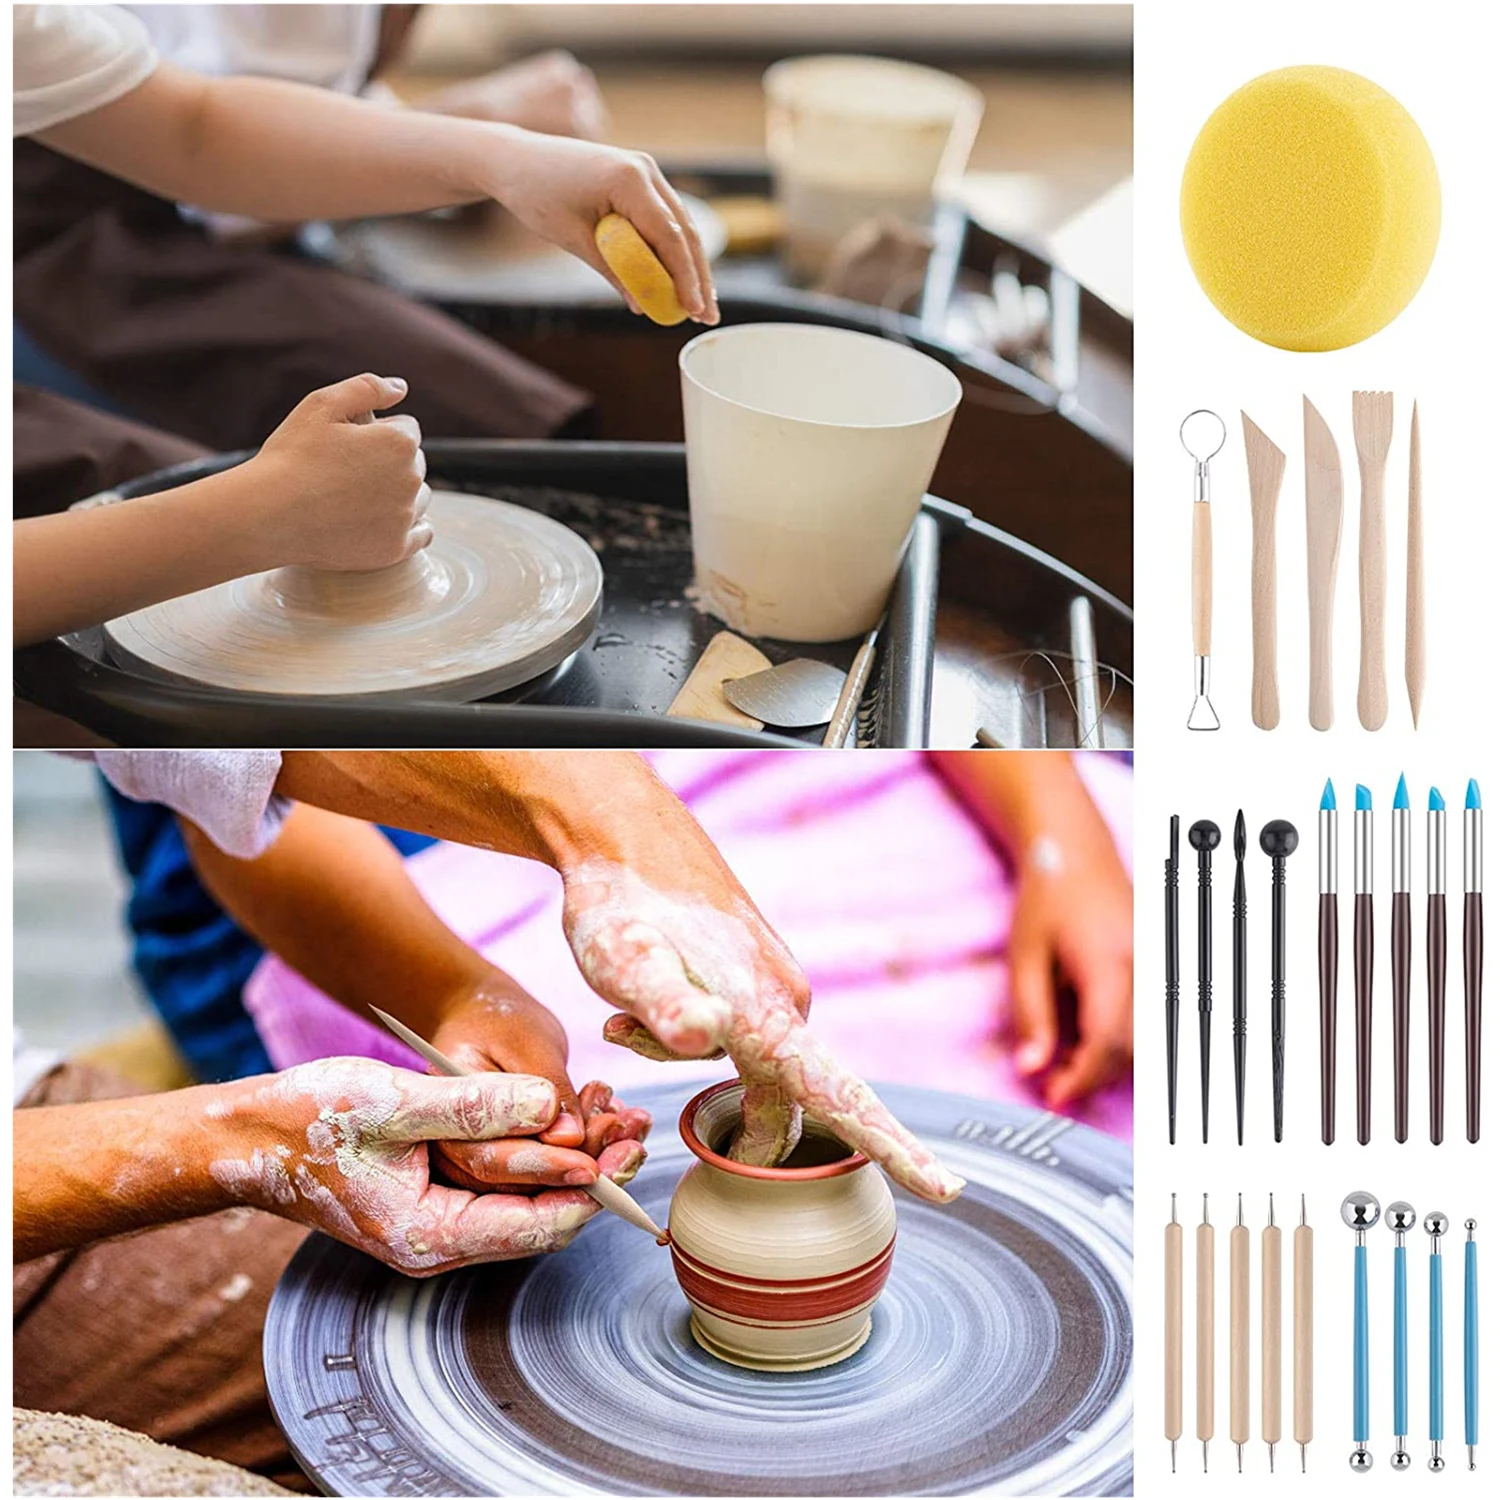 

25pcs Pottery Tools Polymer Modeling Clay Sculpting Set Ball Stylus Dotting Tool Rock Painting Kit for Ceramic Sculpture Craft